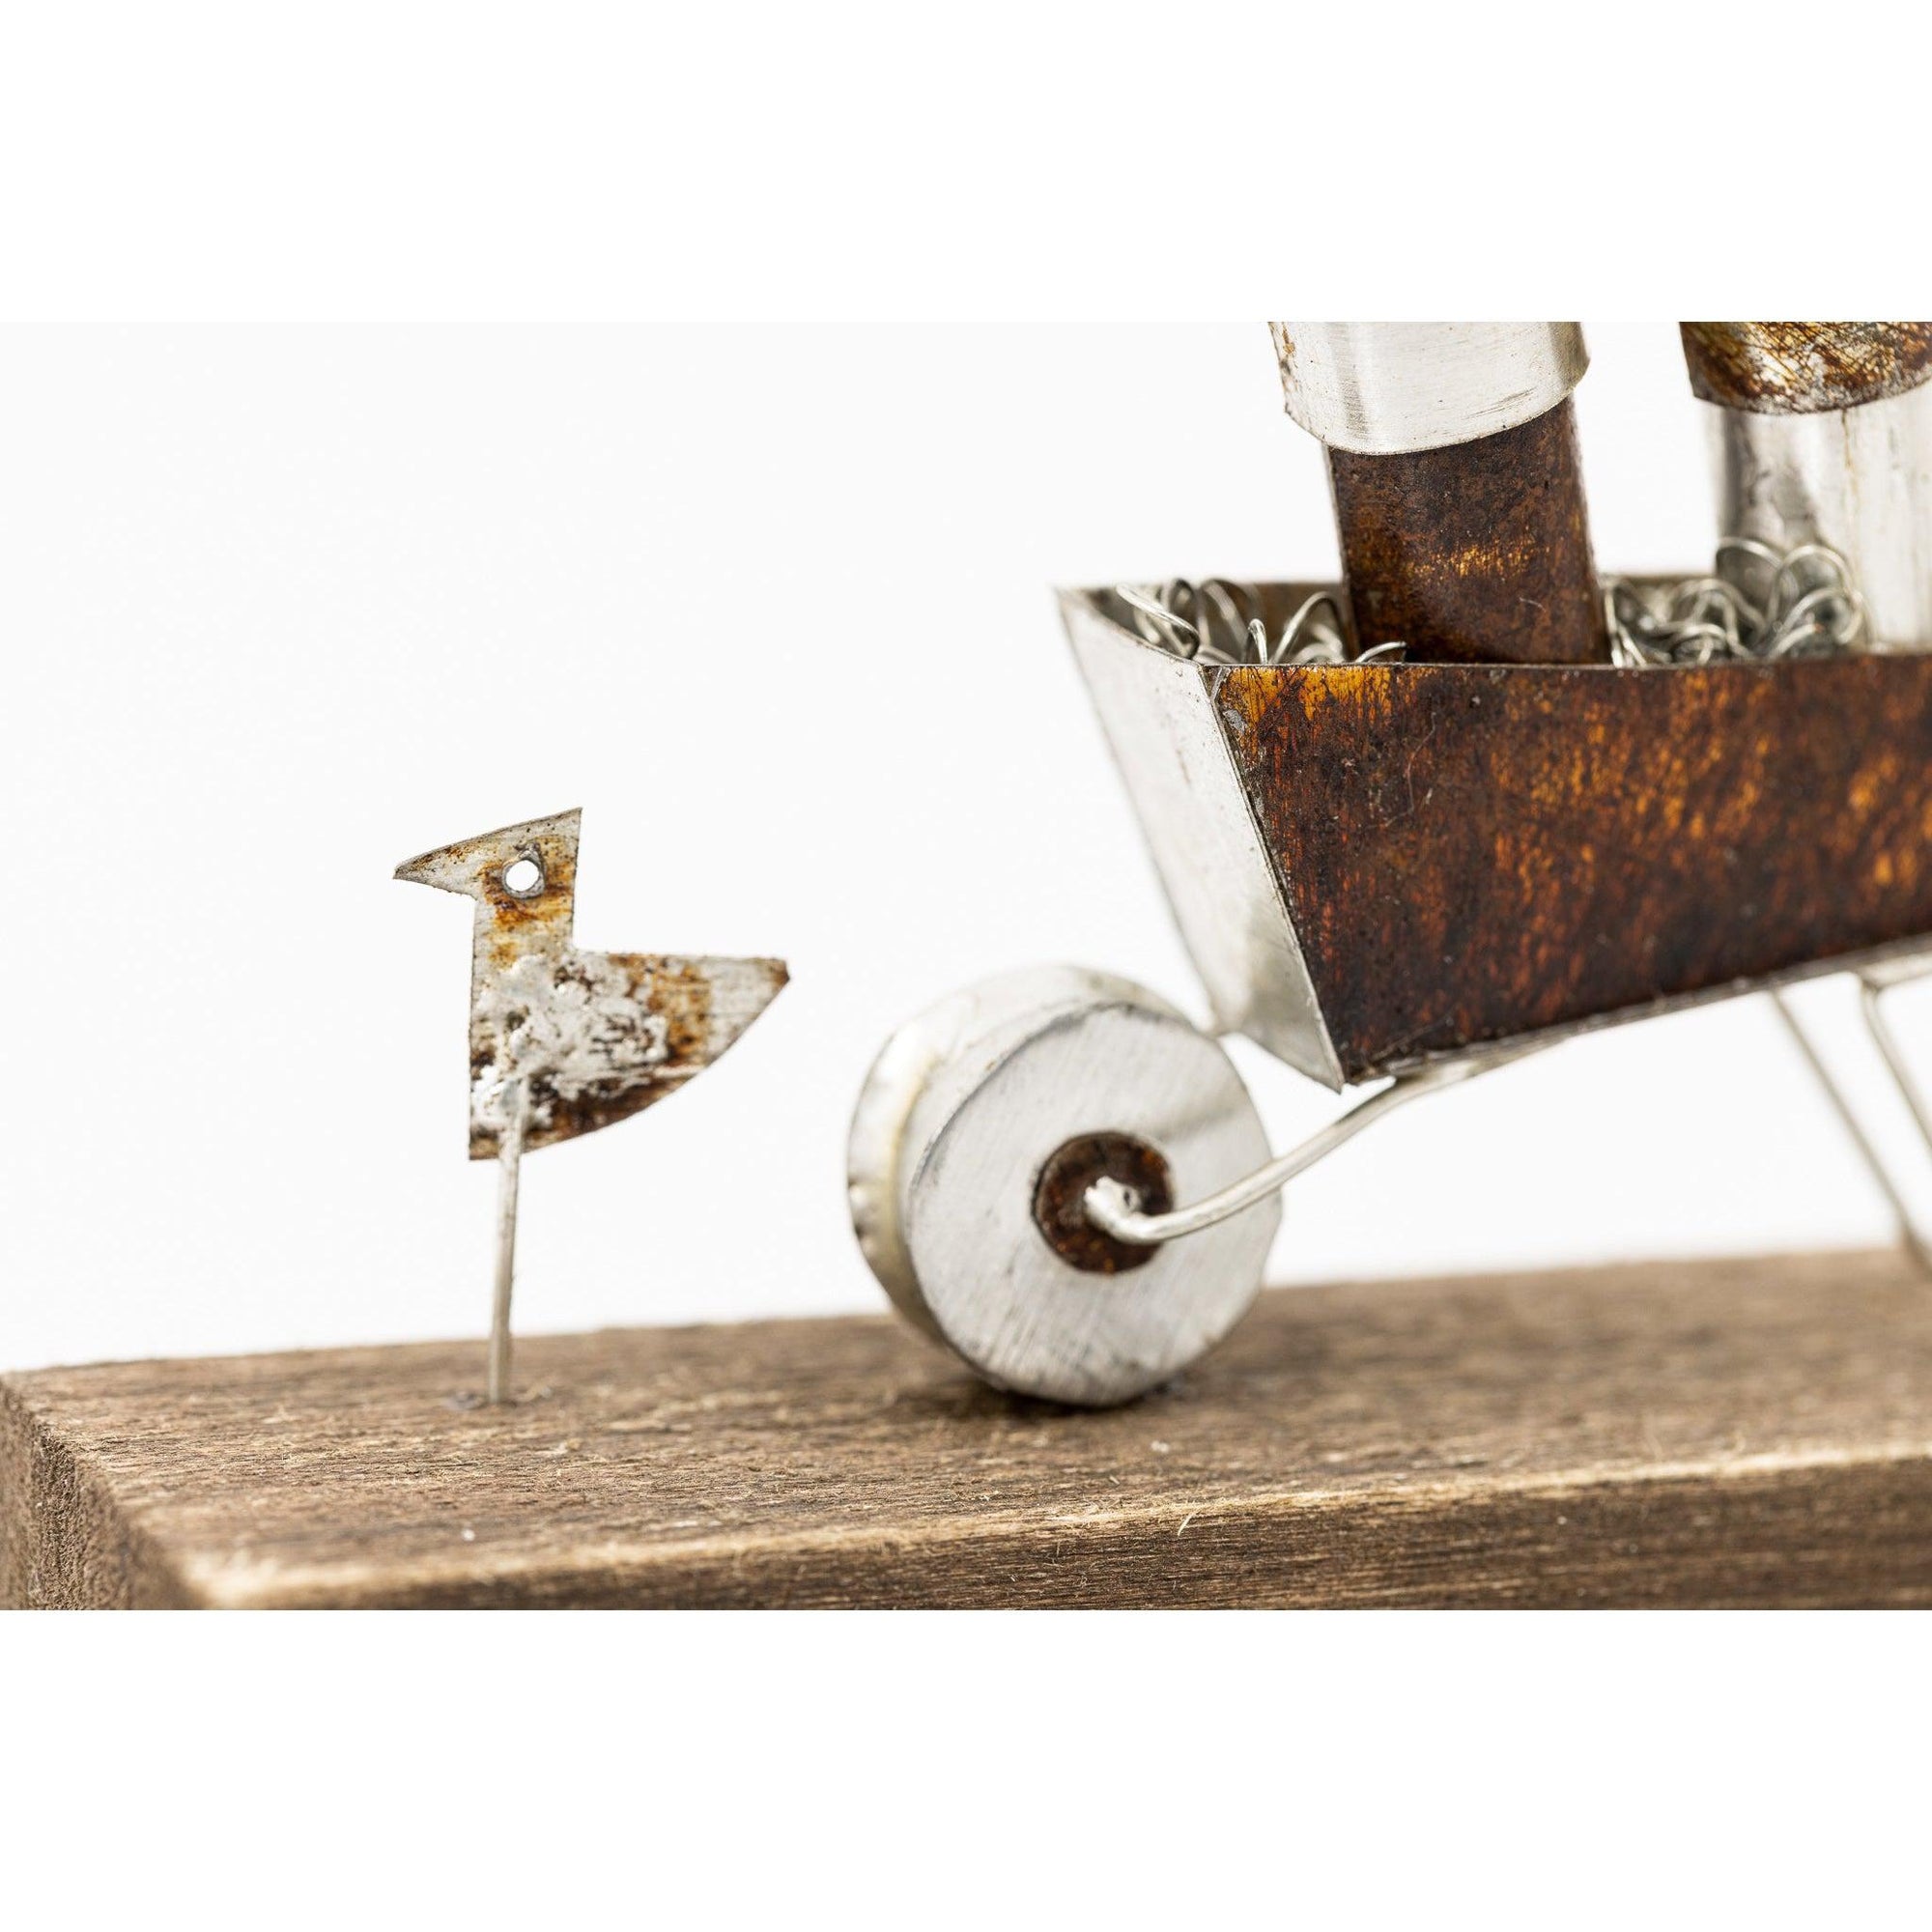 The Wheelbarrow by Sarah Jane Brown available at Padstow Gallery, Cornwall